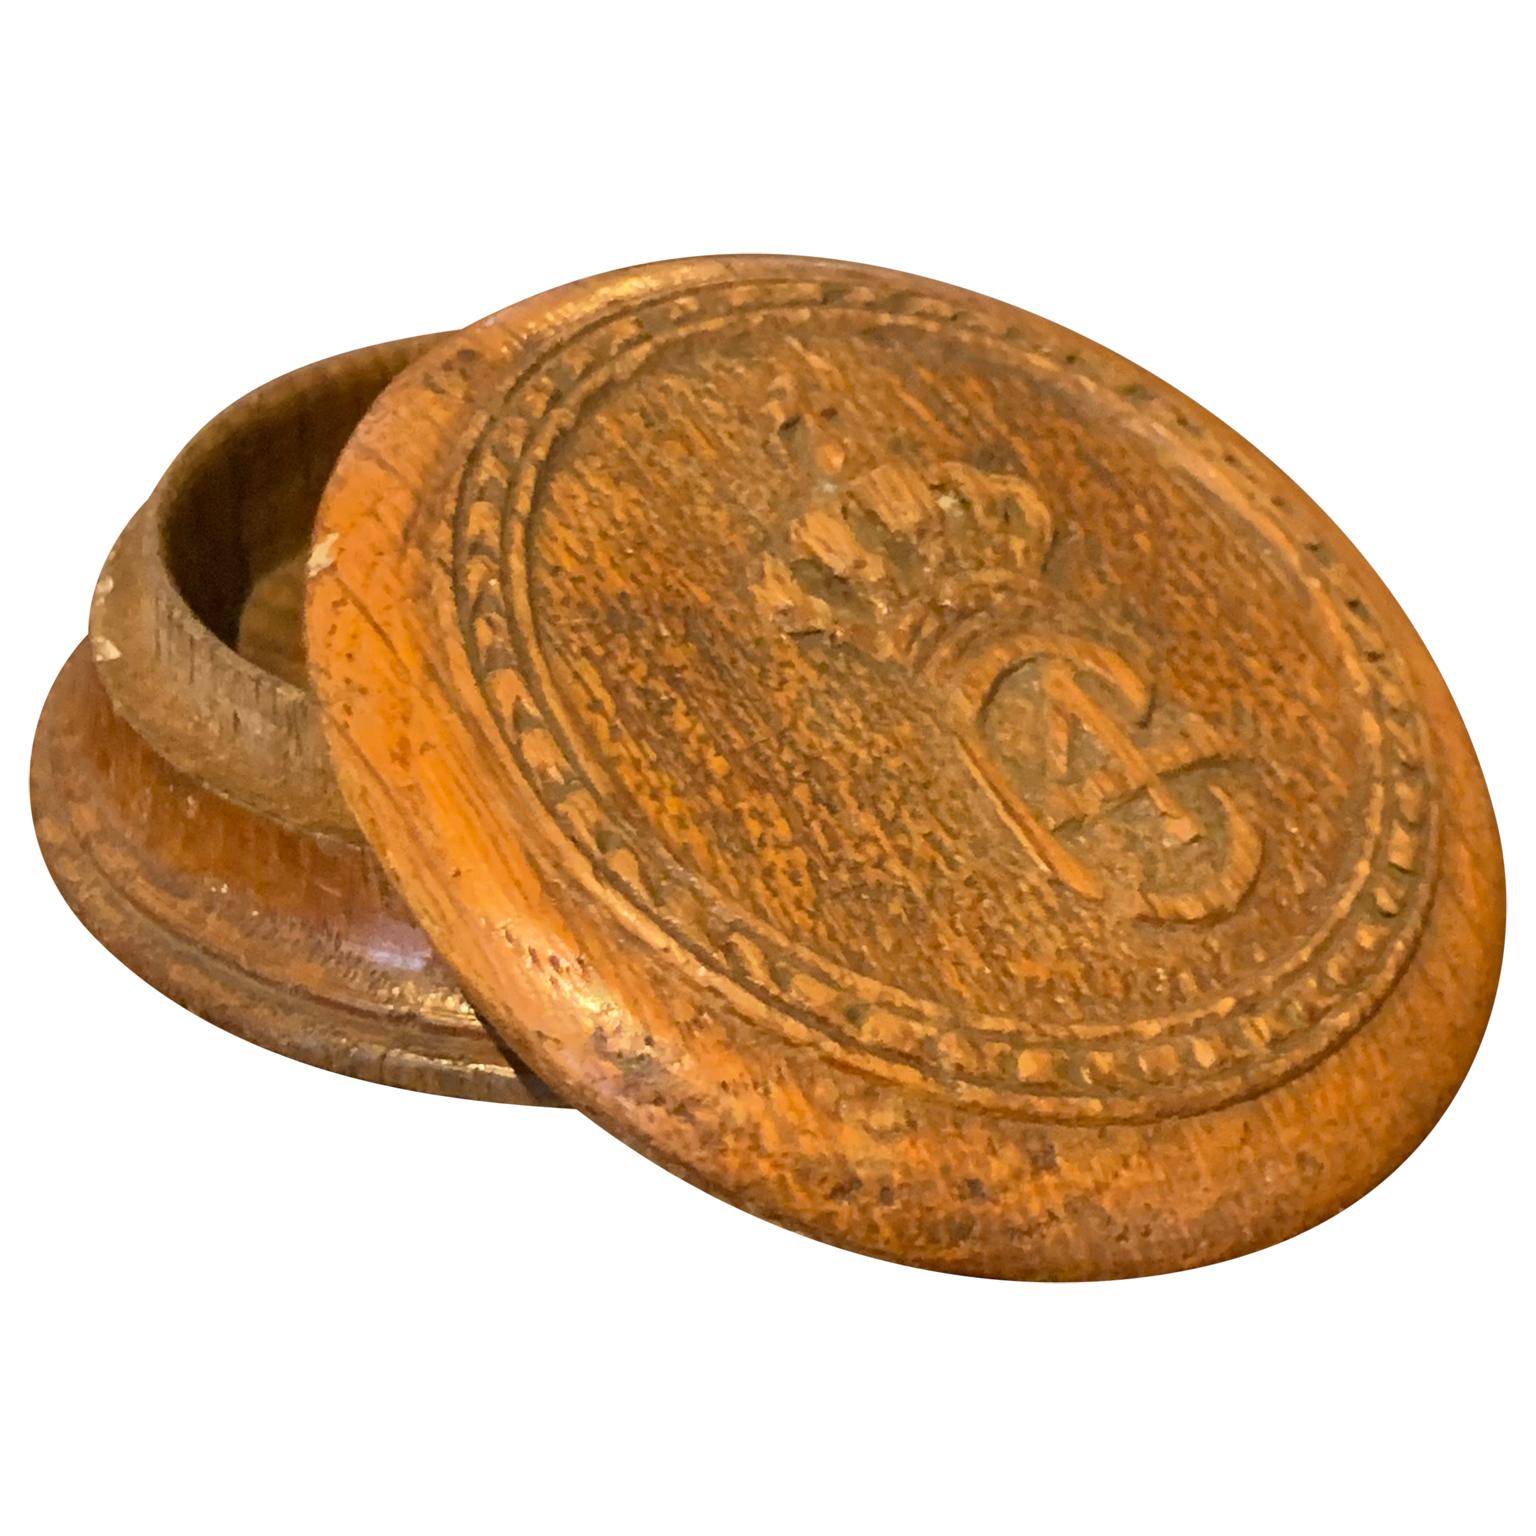 Small round Danish 18th century wooden pillbox or snuffbox with royal King Christian the 4th monogram.
 